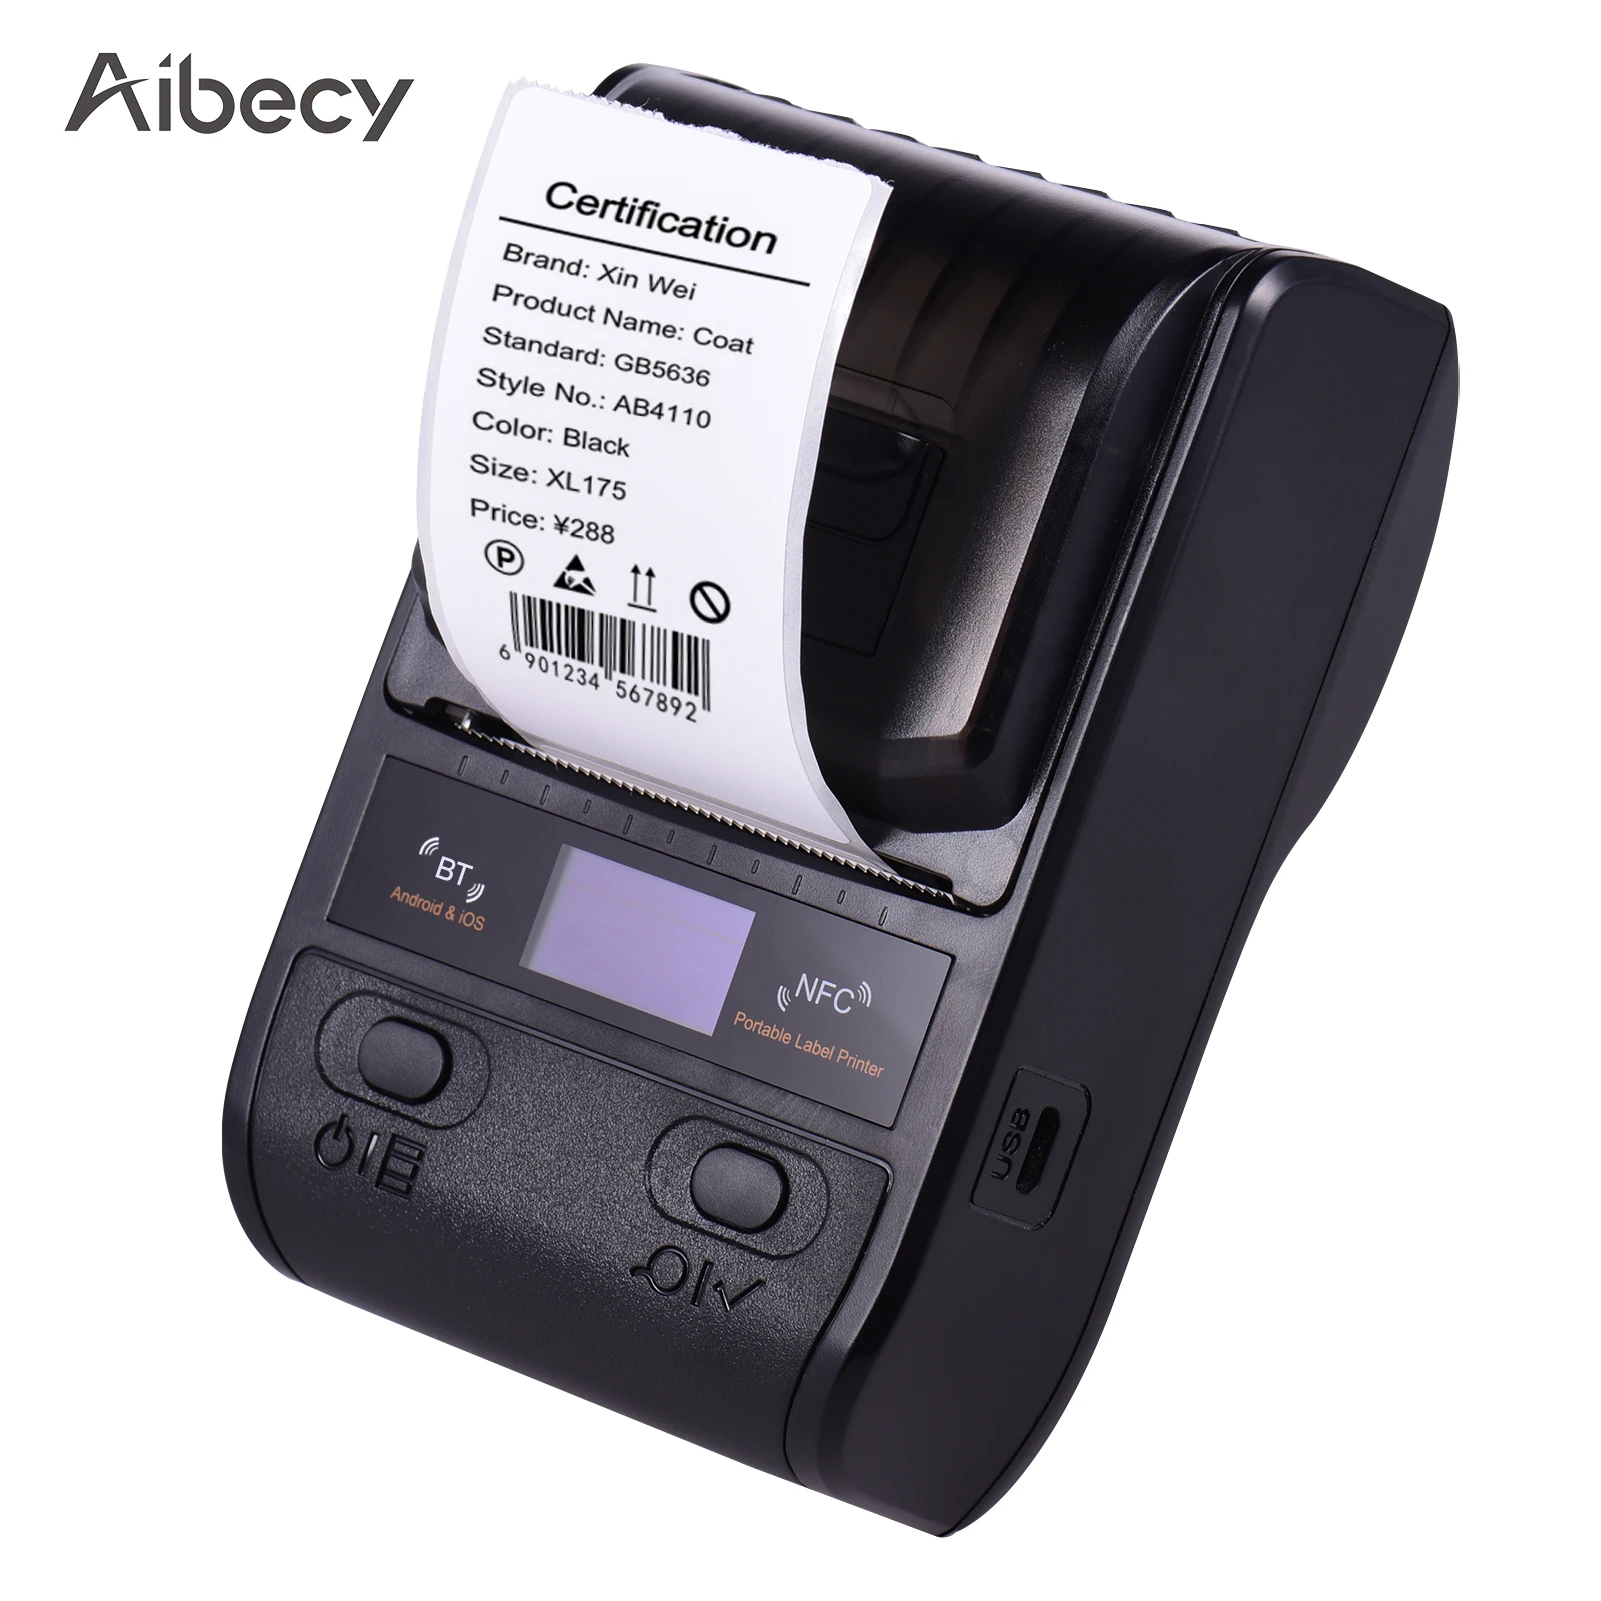 Portable 58mm Thermal Printer USB NFC Wireless Bluetooth Printer Shipping Express Mini Label Printer for Store Price Tag Labels